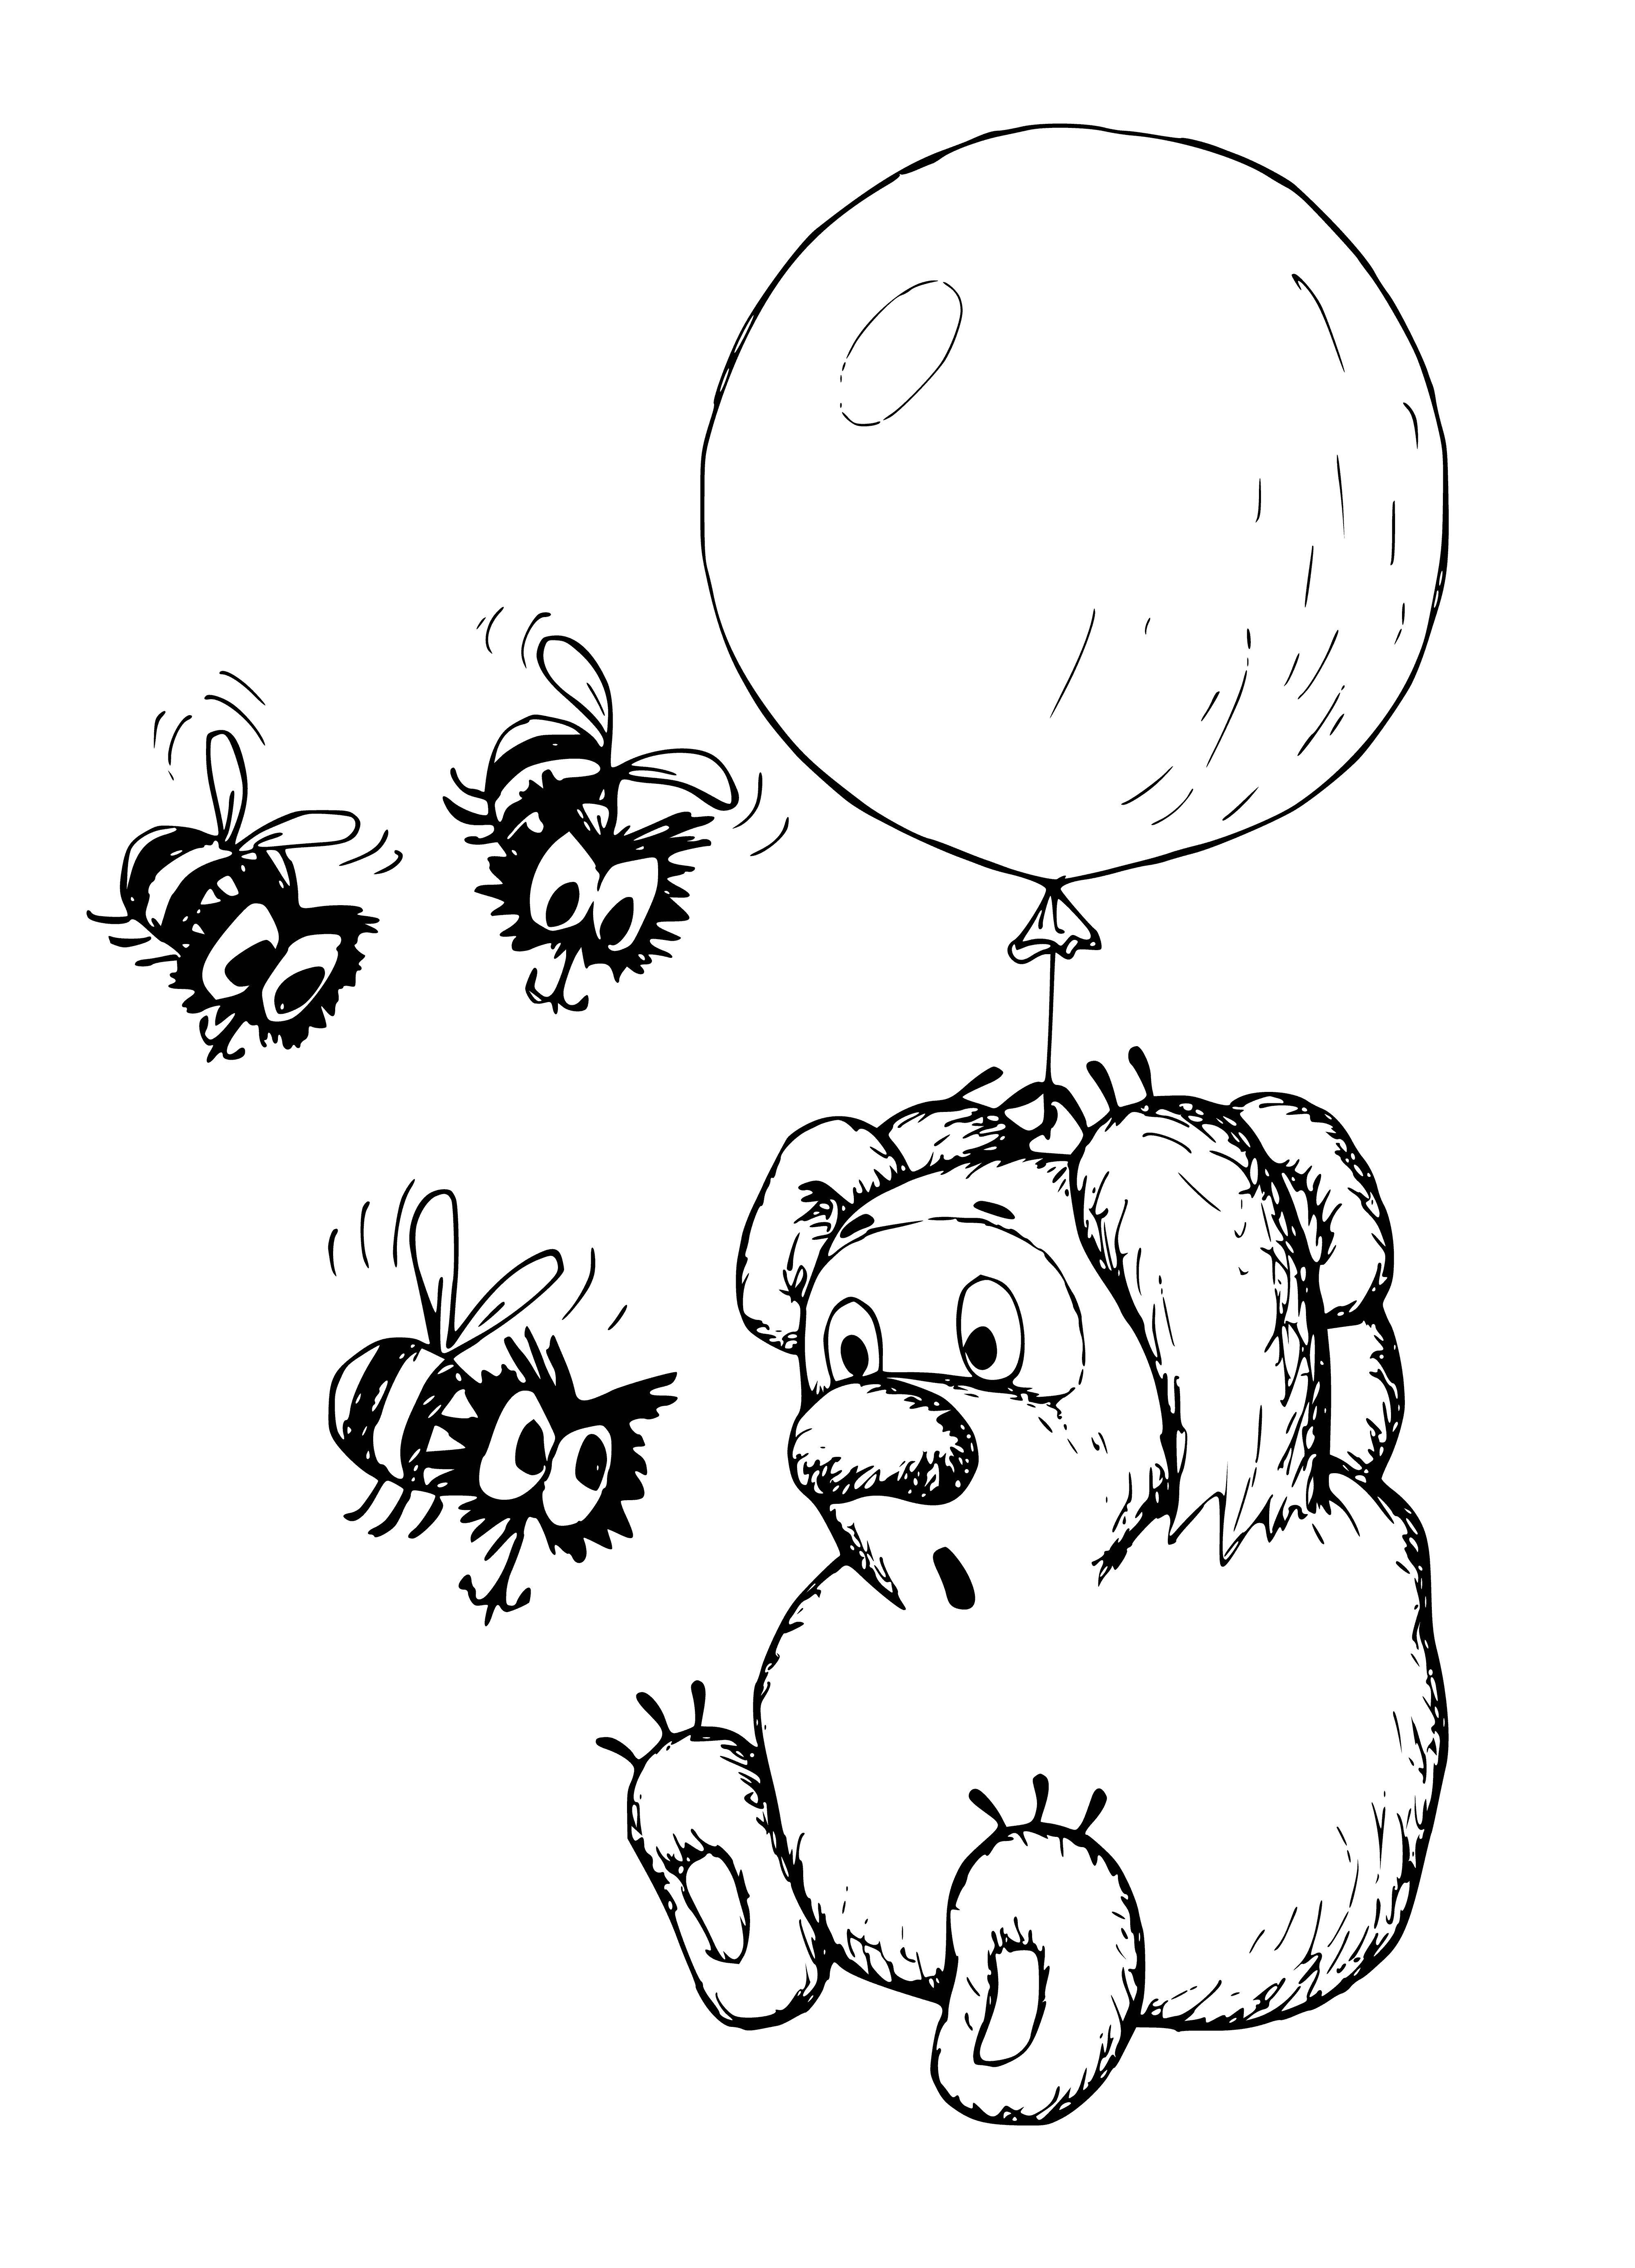 coloring page: Winnie the Pooh flies on a balloon with a big smile, looking very happy.